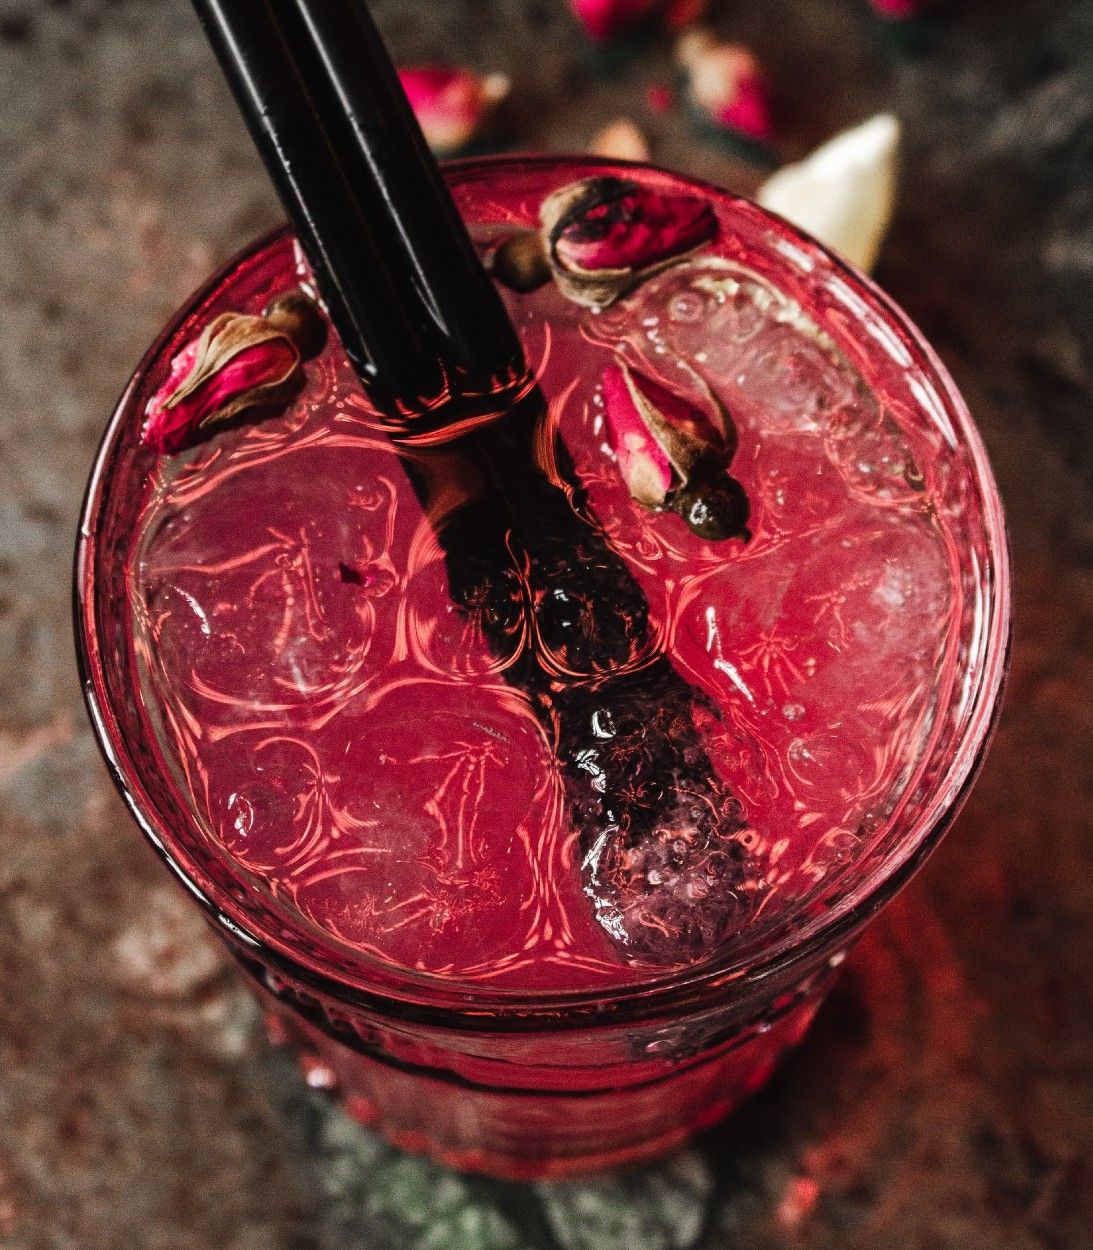 Pomegranate Mocktail Drink Pictured In Glass